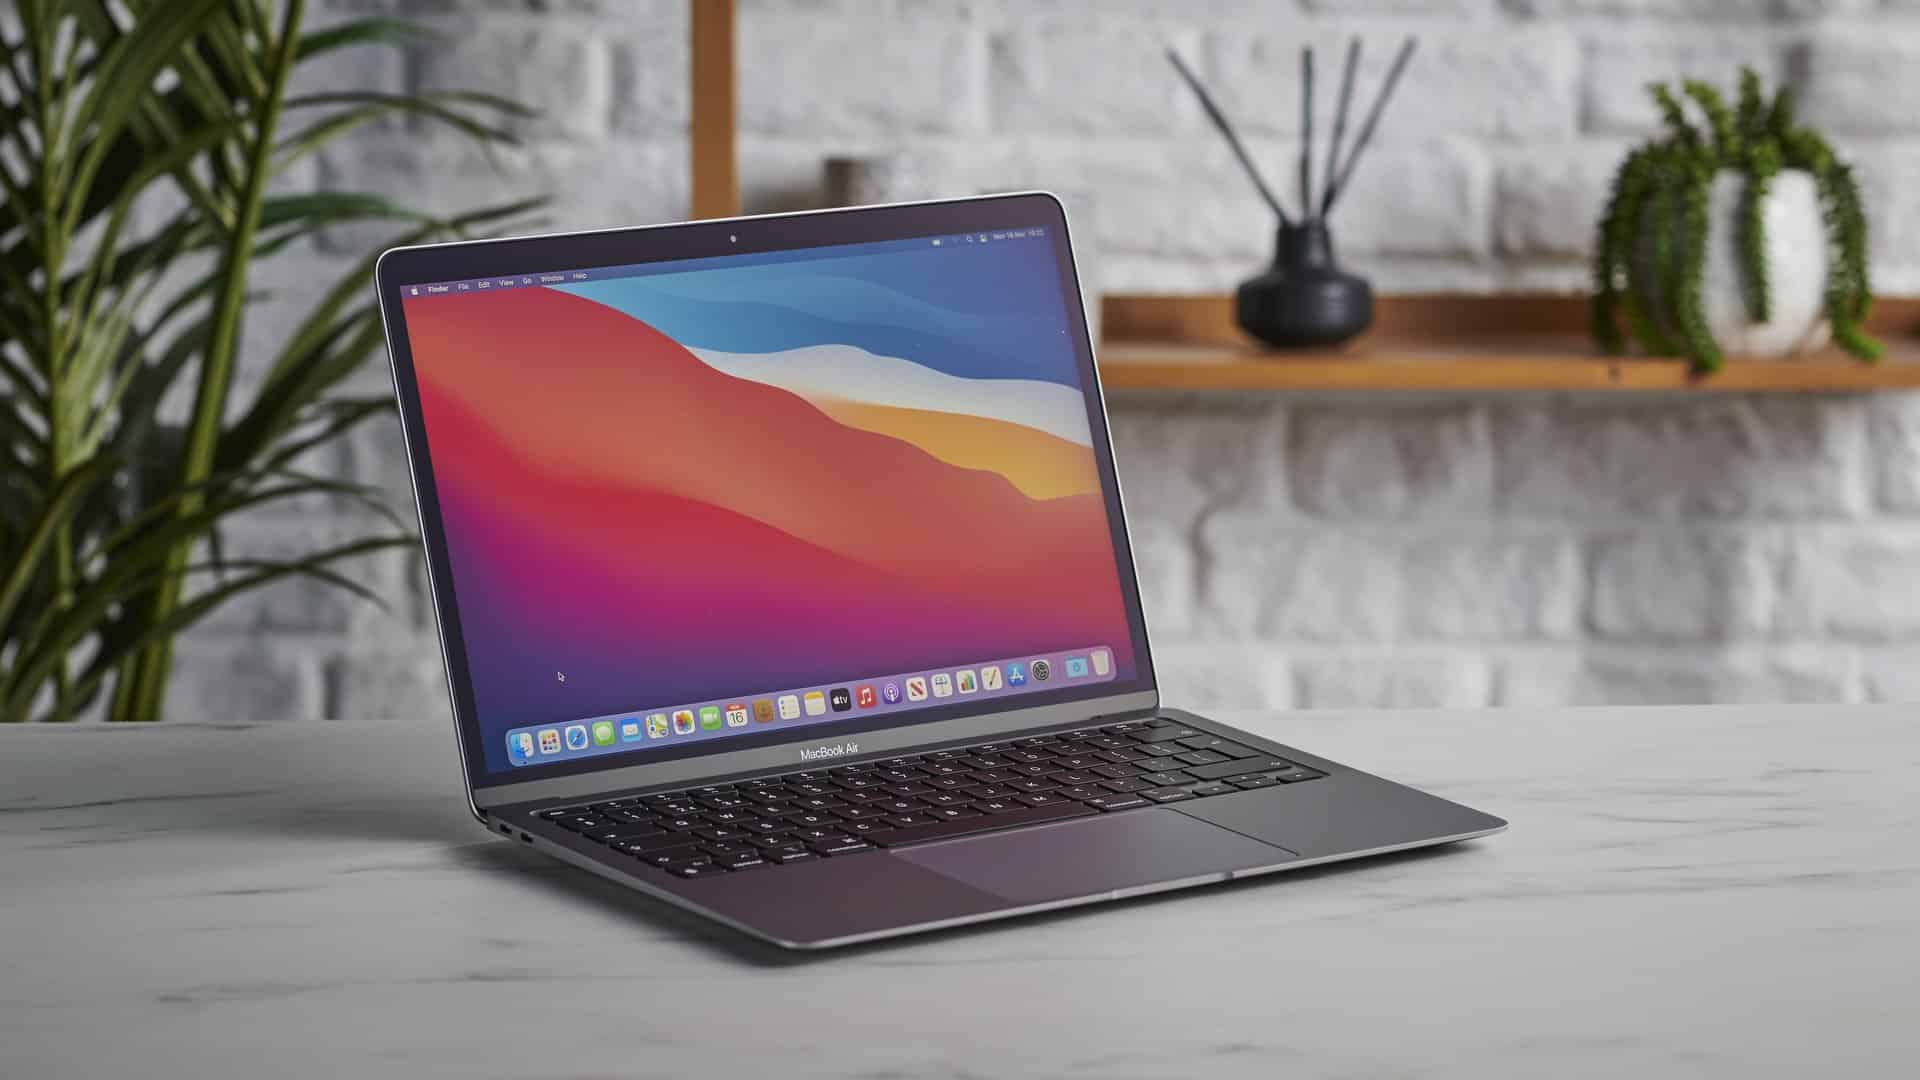 M1 MacBook Air is the best laptop for $999